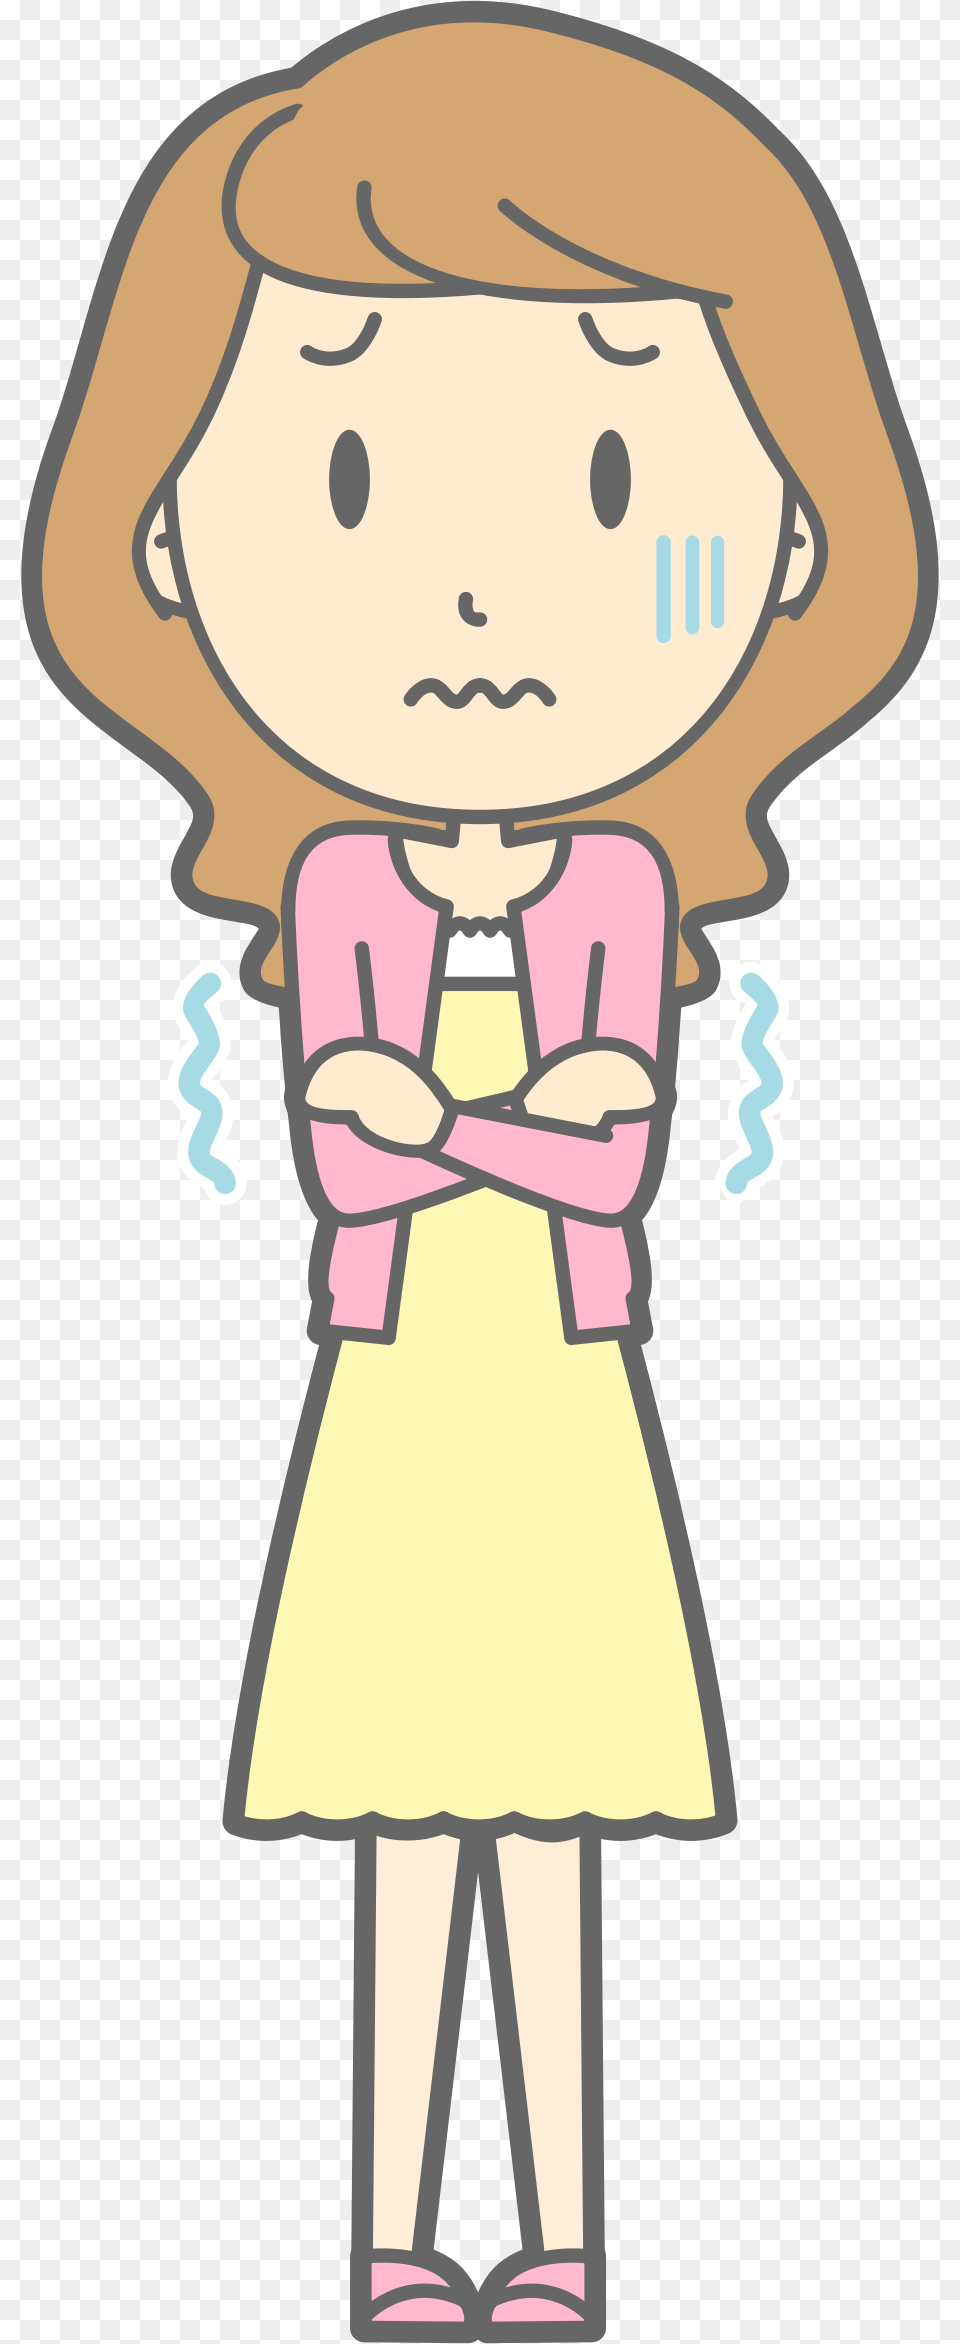 This Icons Design Of It39s Cold, Child, Female, Girl, Person Free Transparent Png